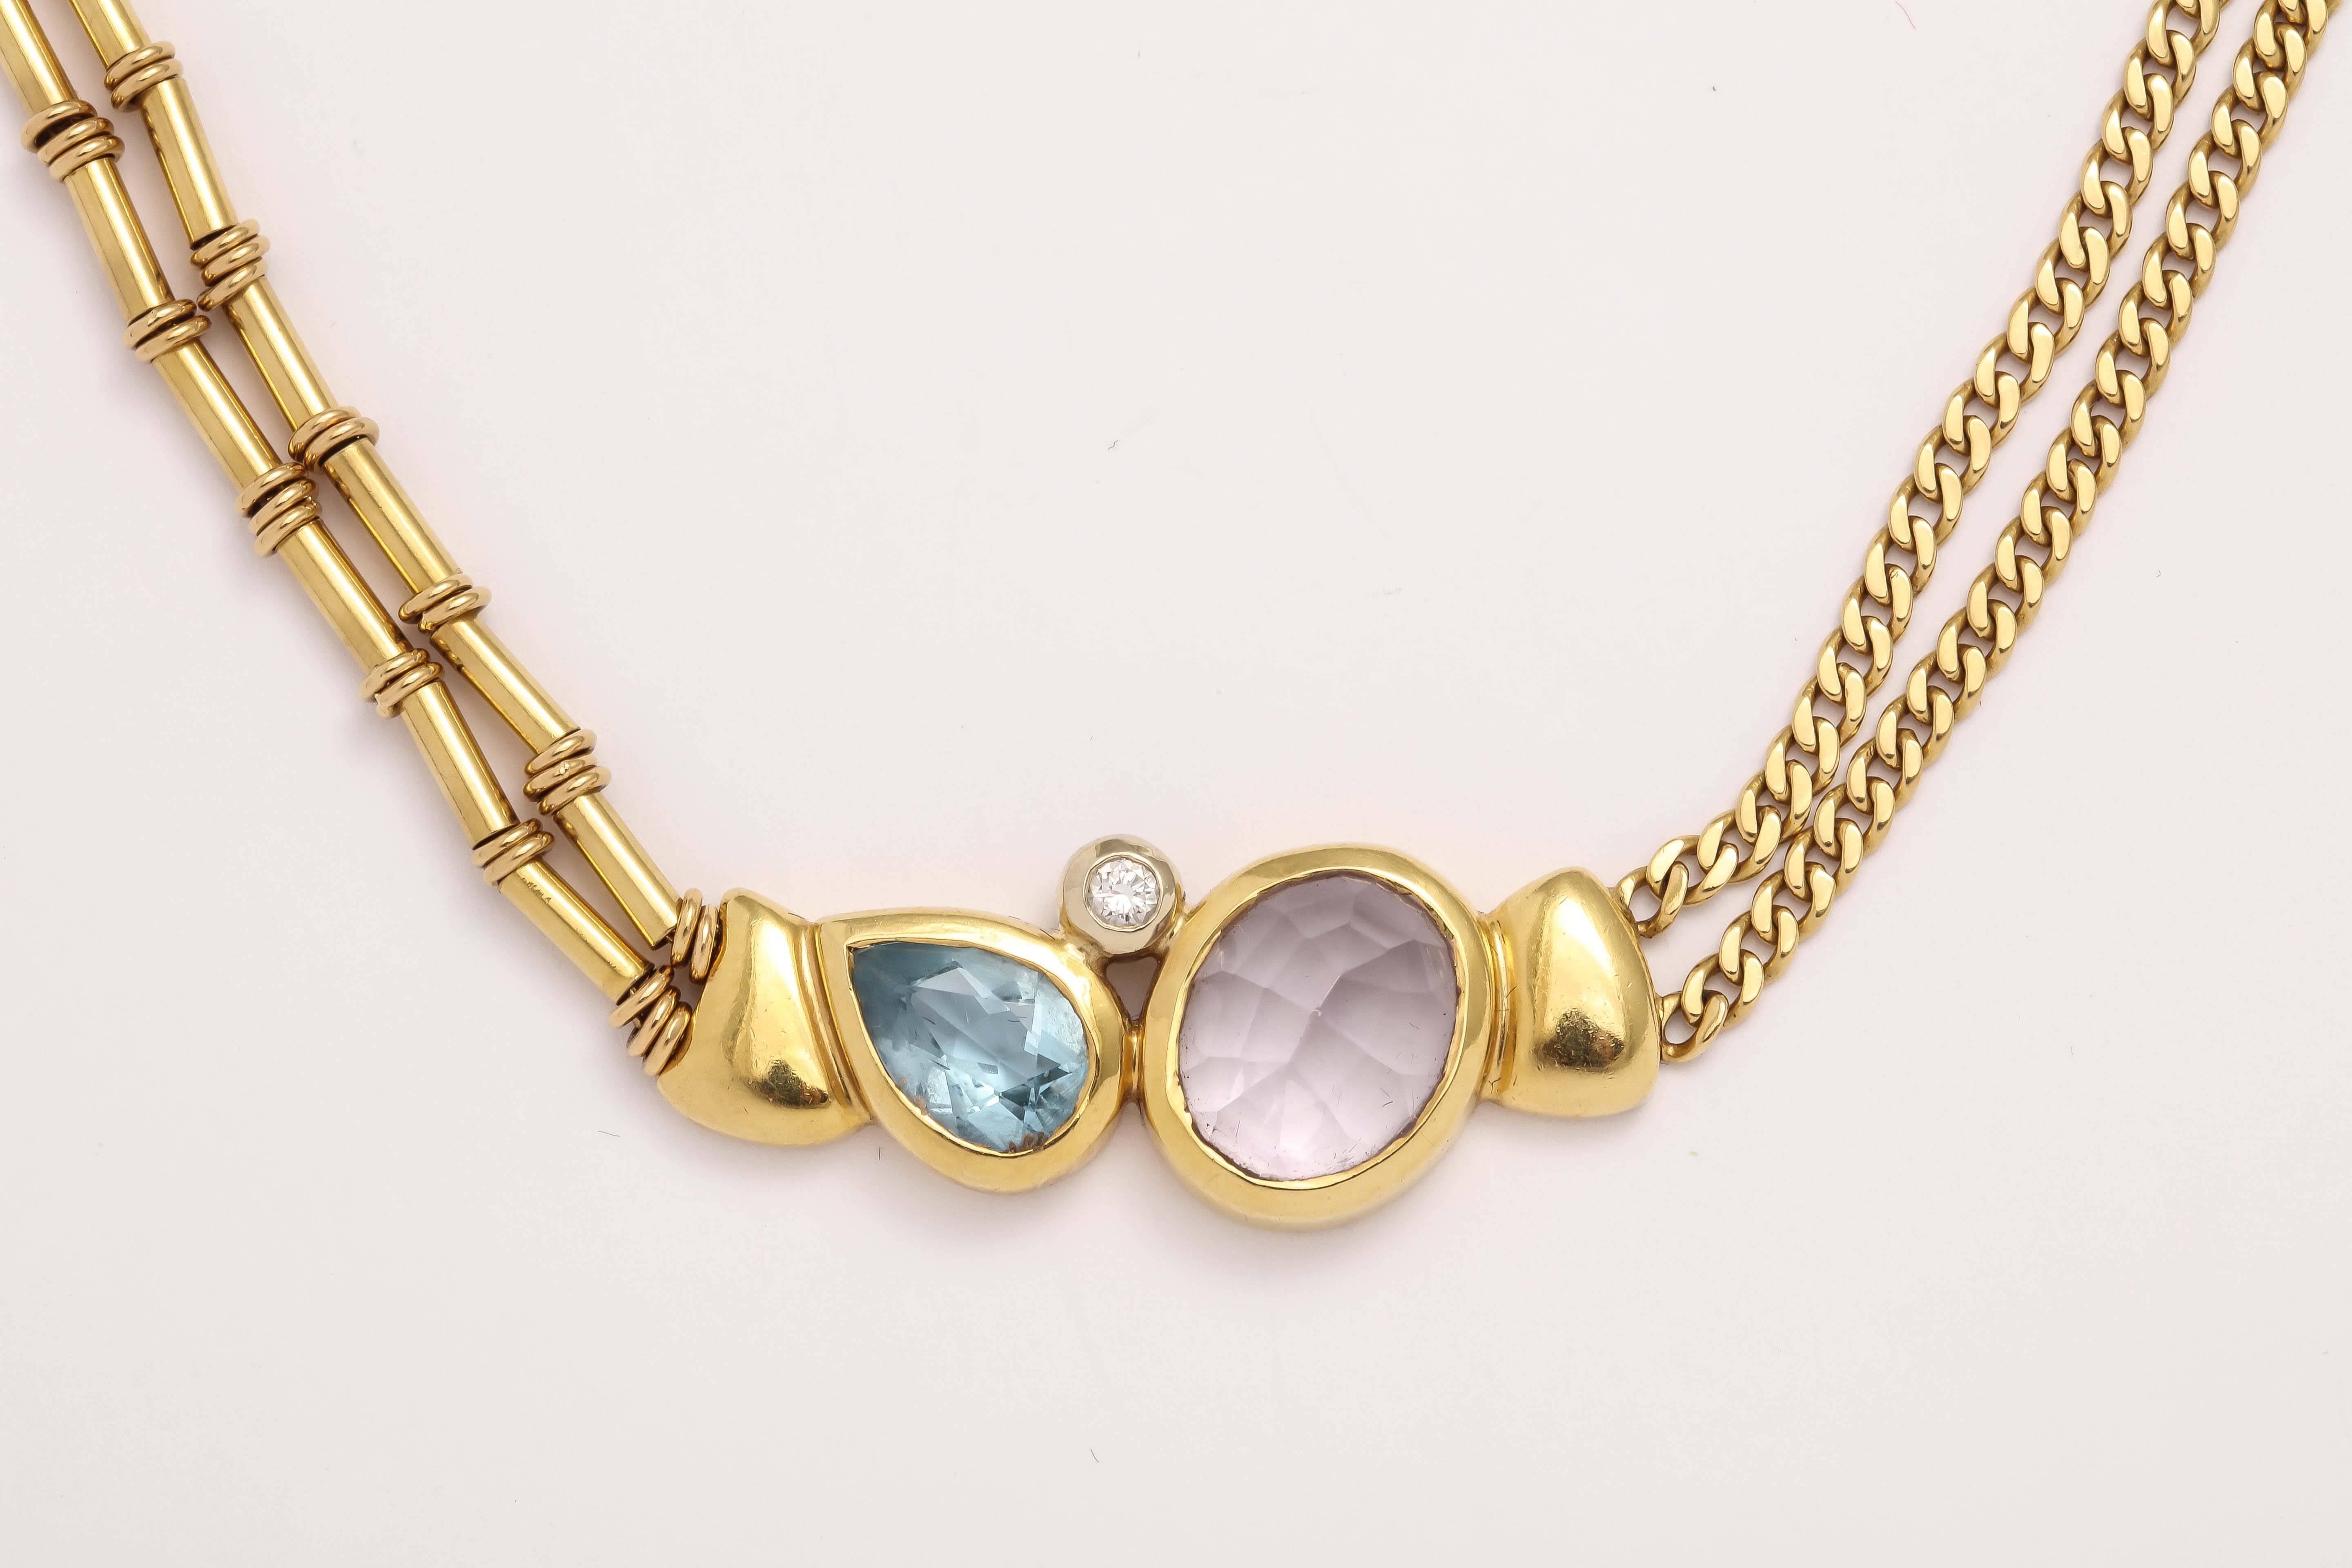 18kt Art form Necklace of  varying 18kt Yellow Gold chains and center set with a Pear shaped Blue Topaz and faceted  Kunzite  -  reverse set and foiled by a bezel set Diamond. Engraved Manfredi in Block Letters on the Clasp.